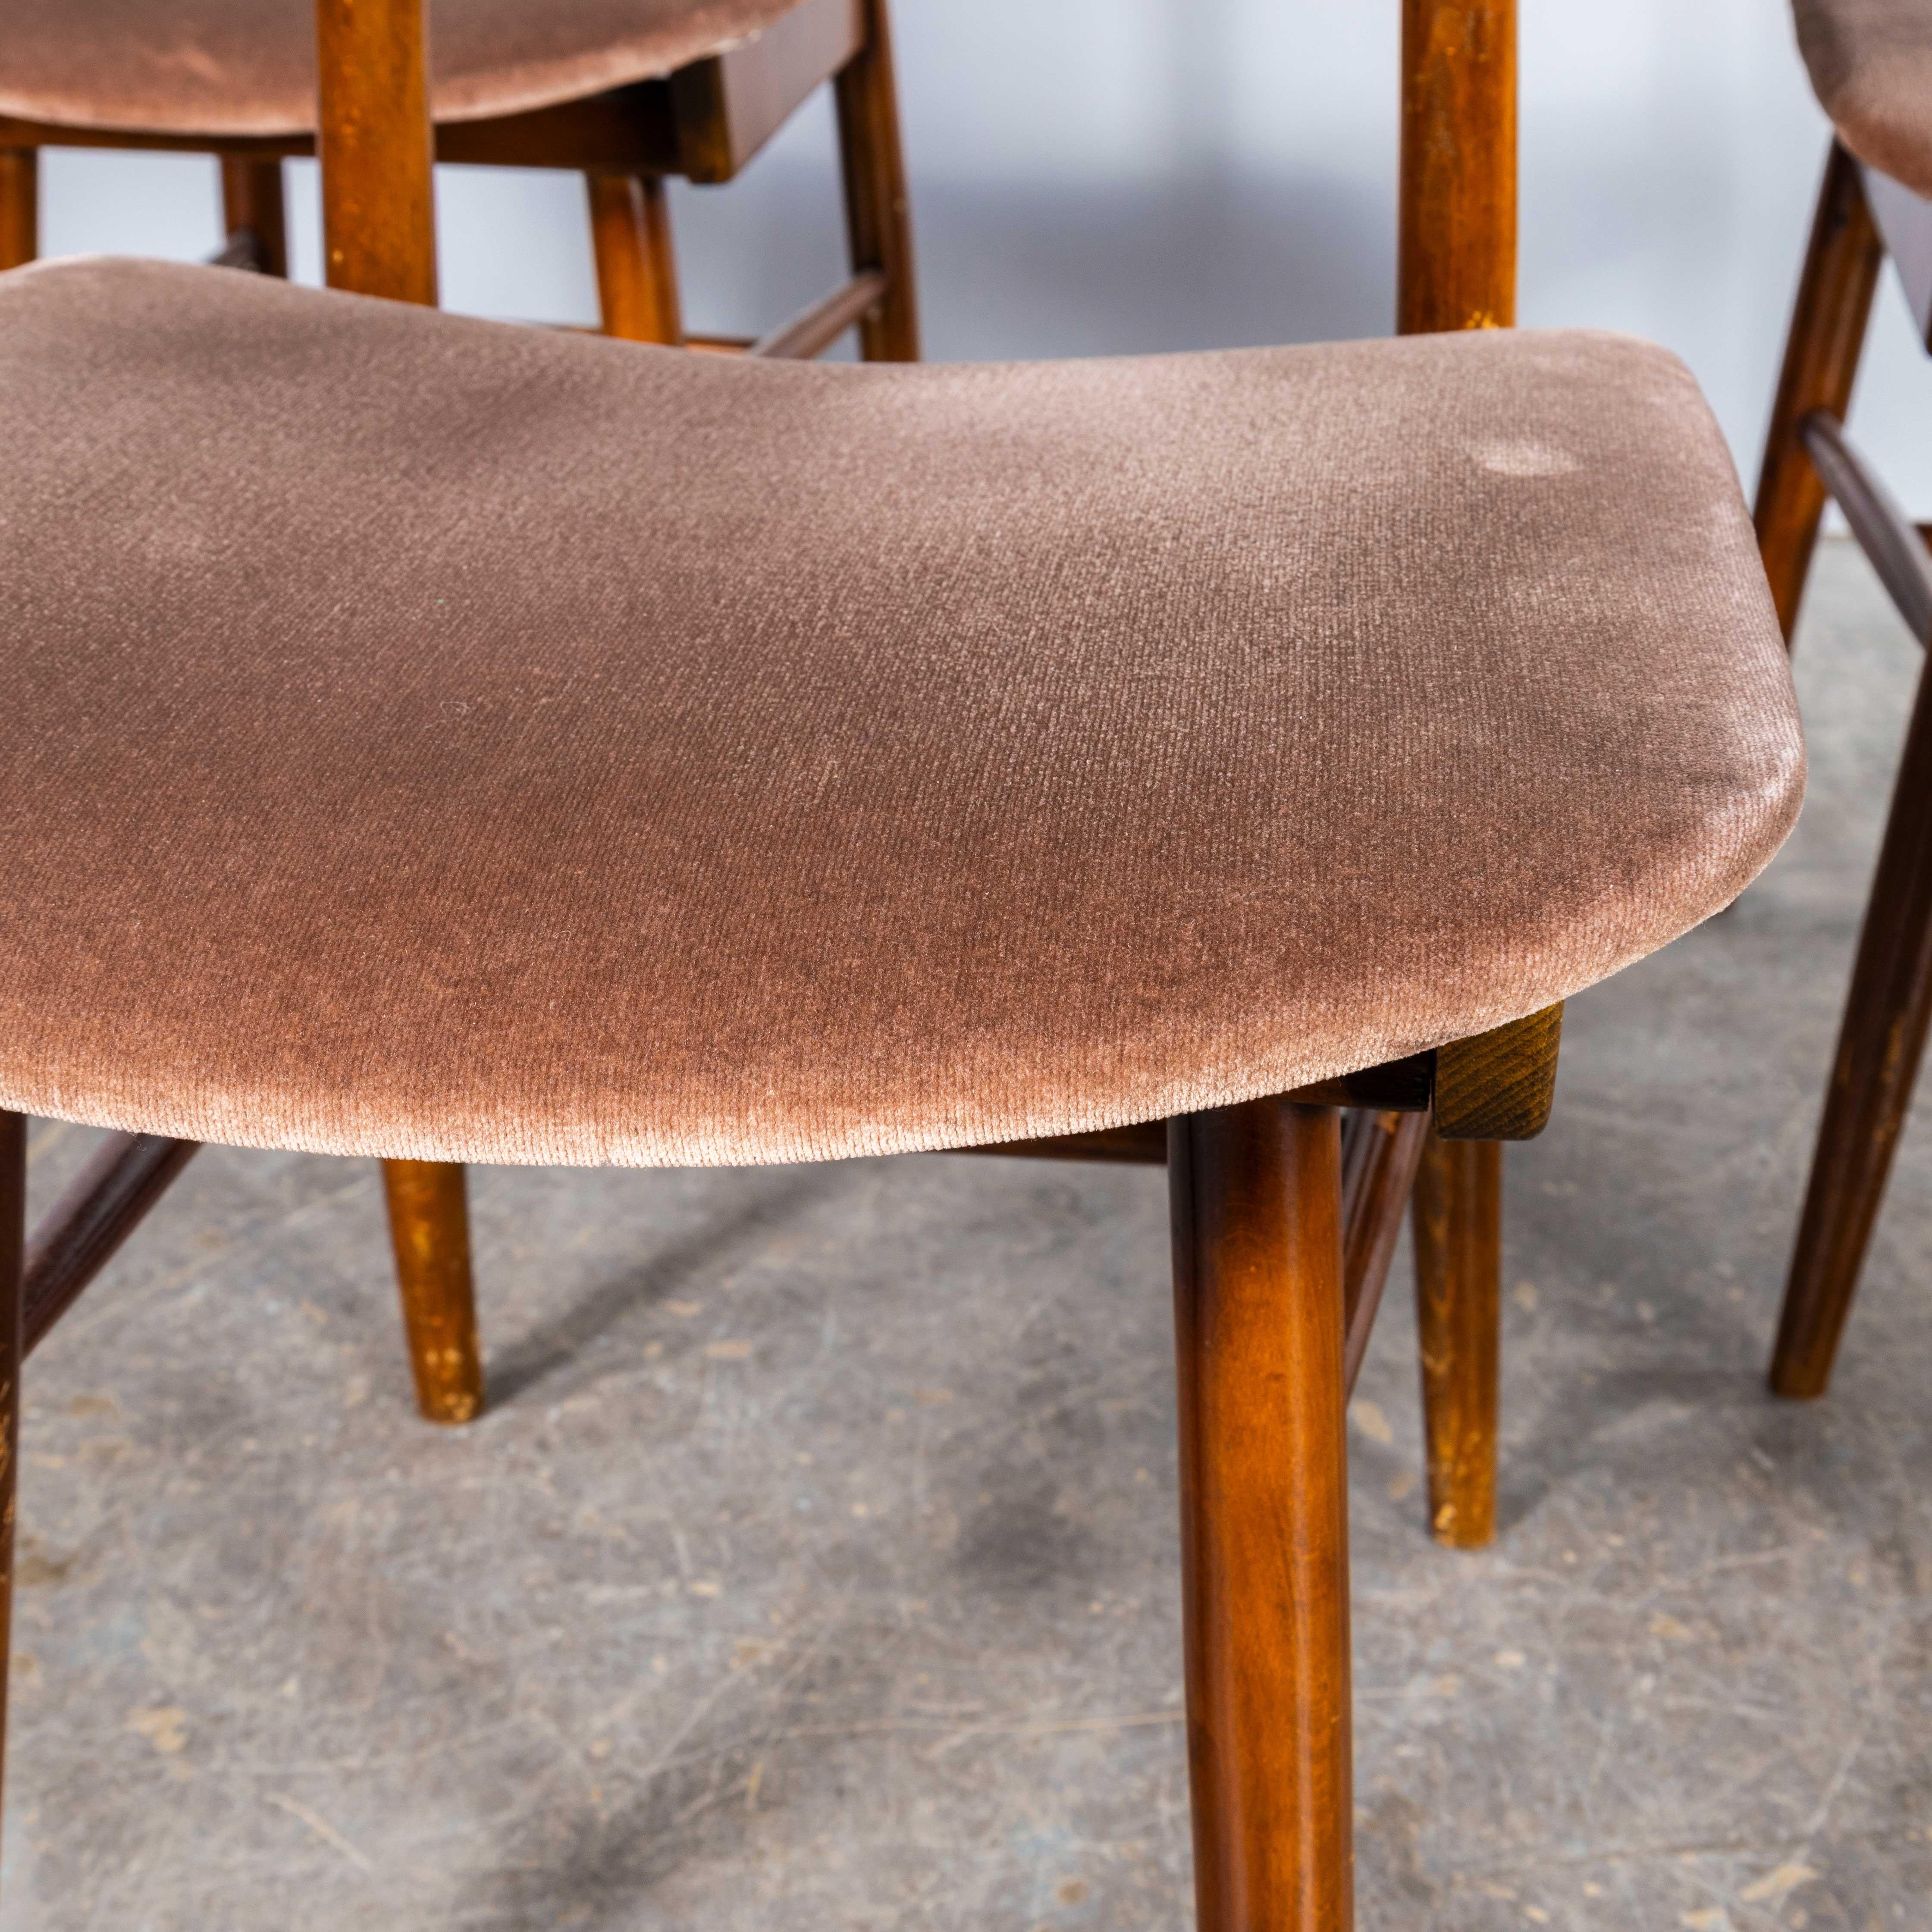 1950's Shield Back Mid Century Upholstered Dining Chair For Sale 7